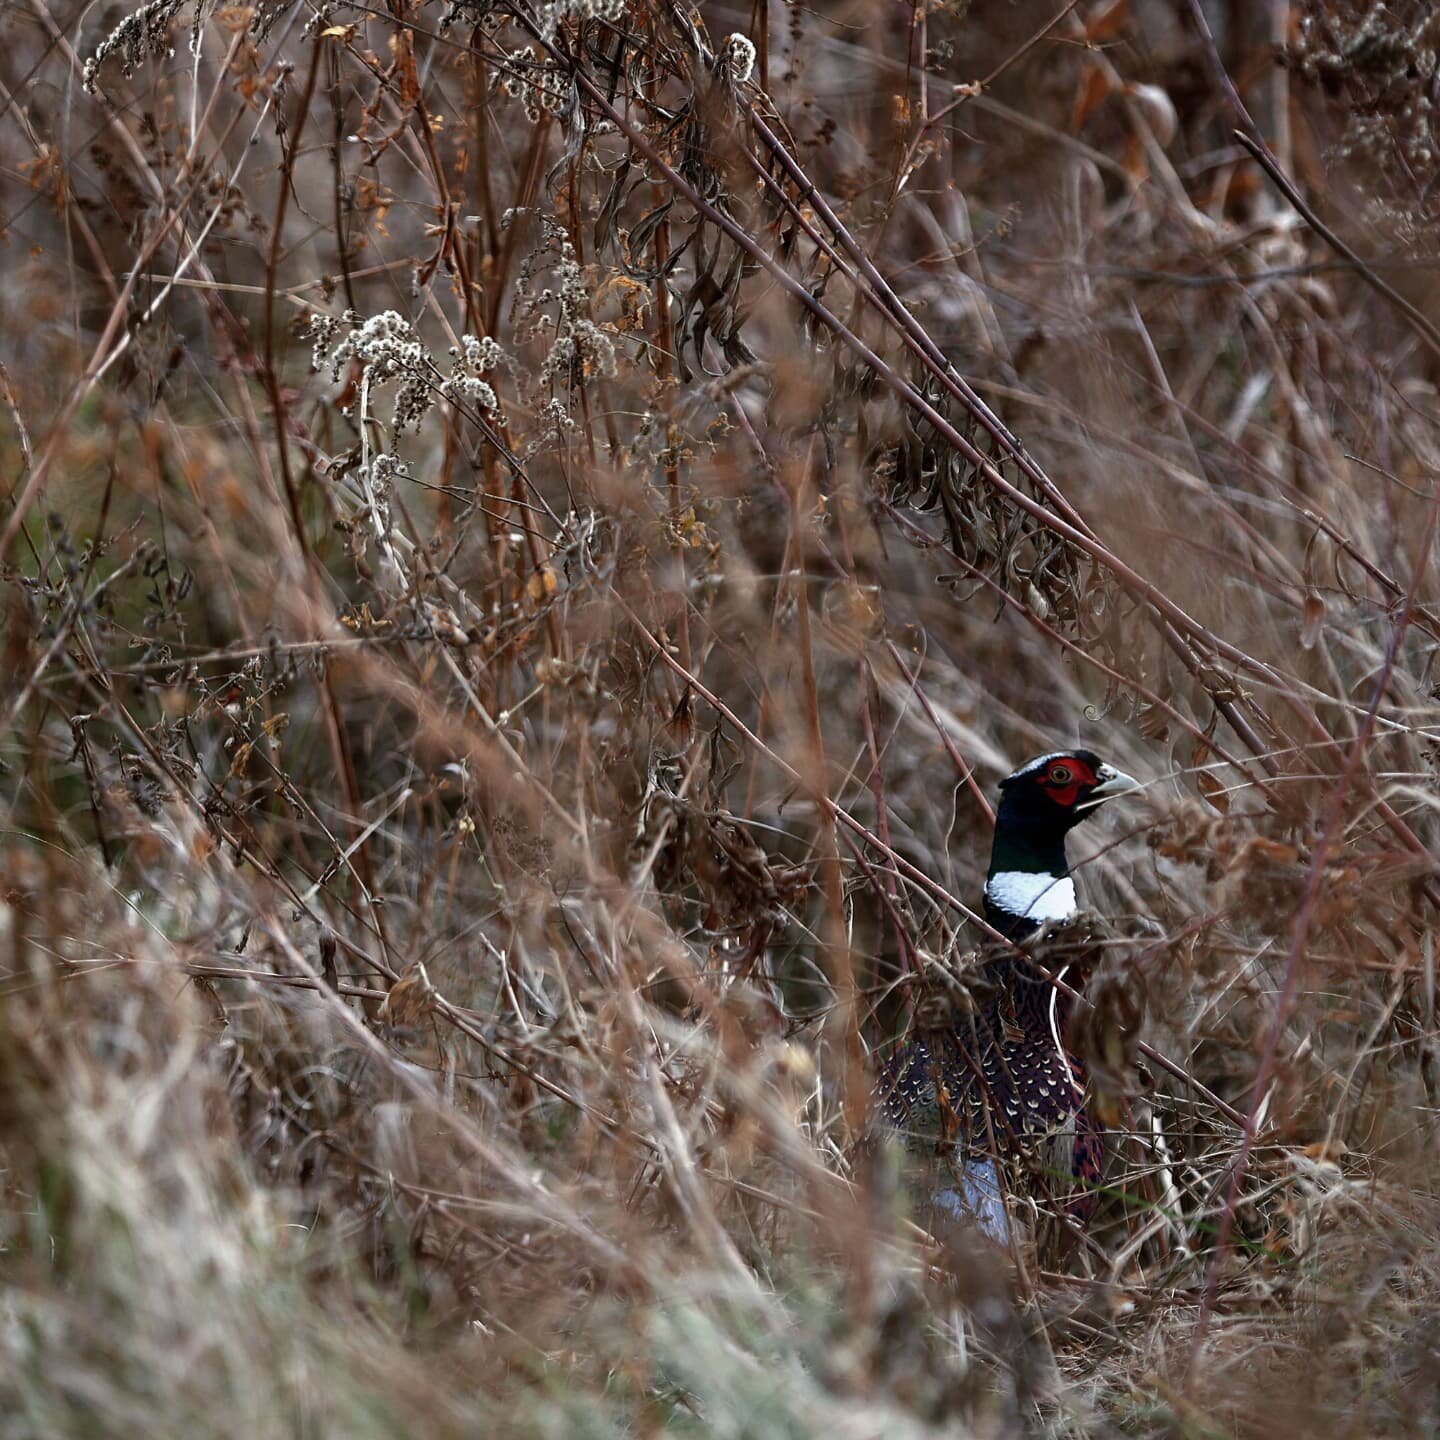 Having fun photographing the pheasants. There are at least 5 living in the tall grass near our house, easily seen at a distance but of course elusive whenever the camera comes out. #homenatgeo #iseeyou #prettybirds